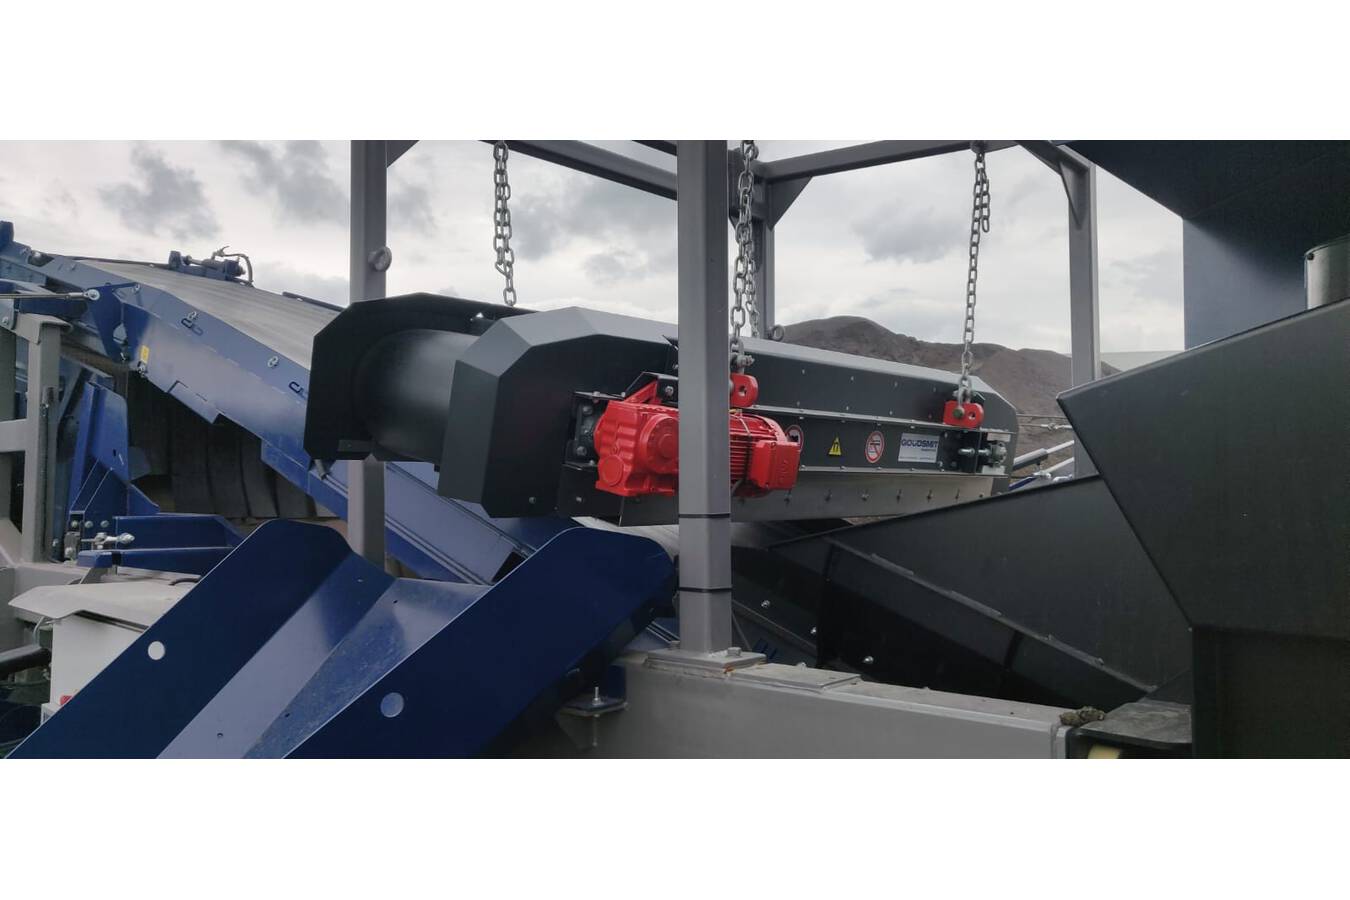 The recently developed, modular, mobile overbelt magnets are intended for recycling systems such as shredders, crushers and screens